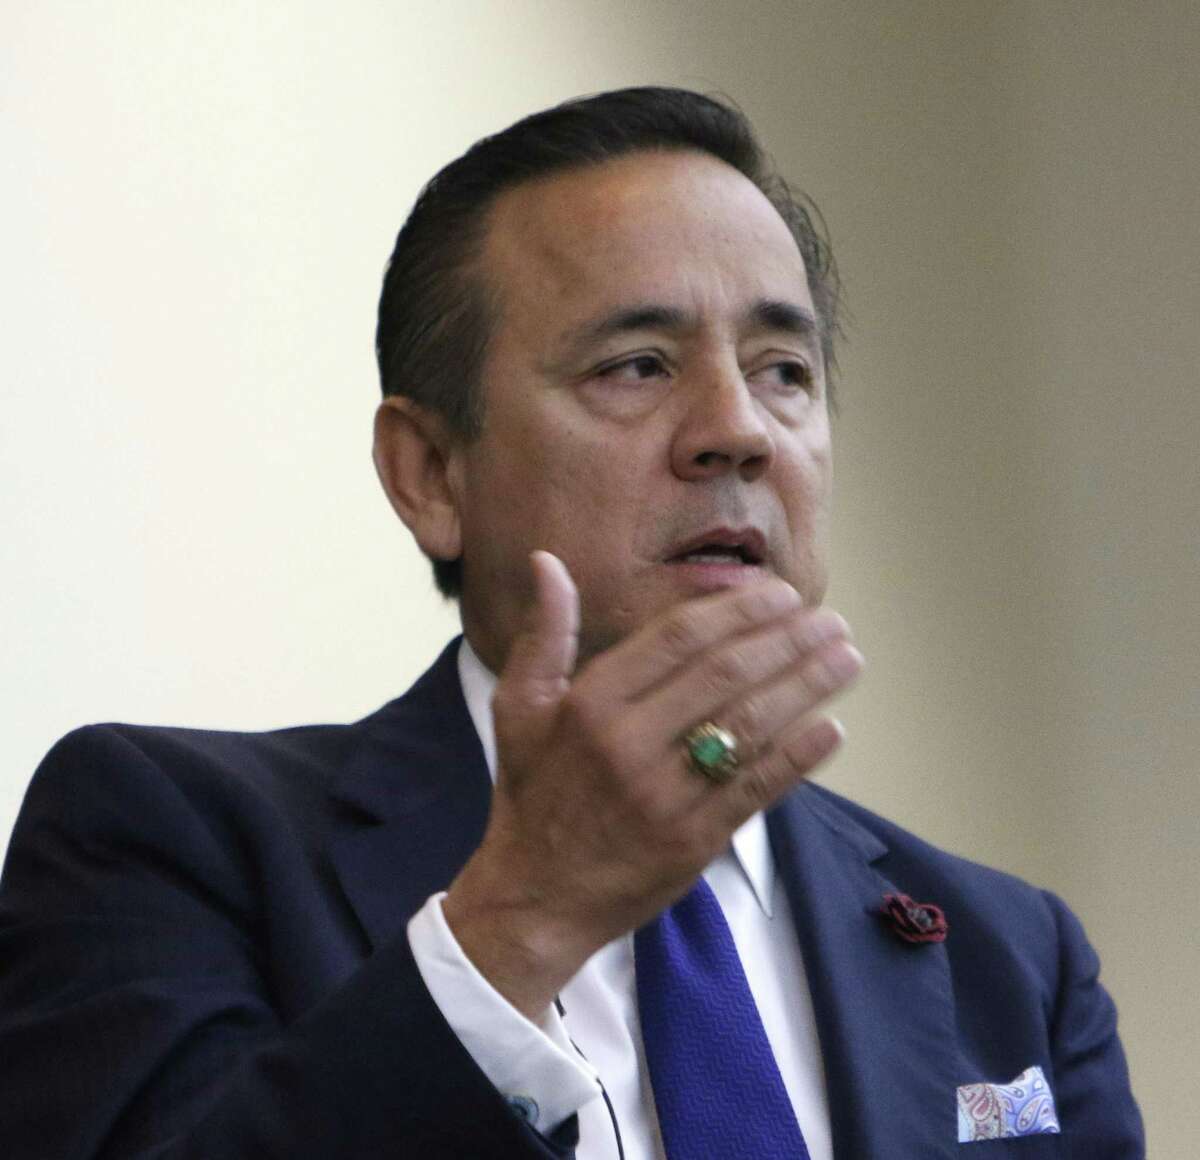 State Sen. Carlos Uresti was indicted Tuesday on multiple federal criminal charges.